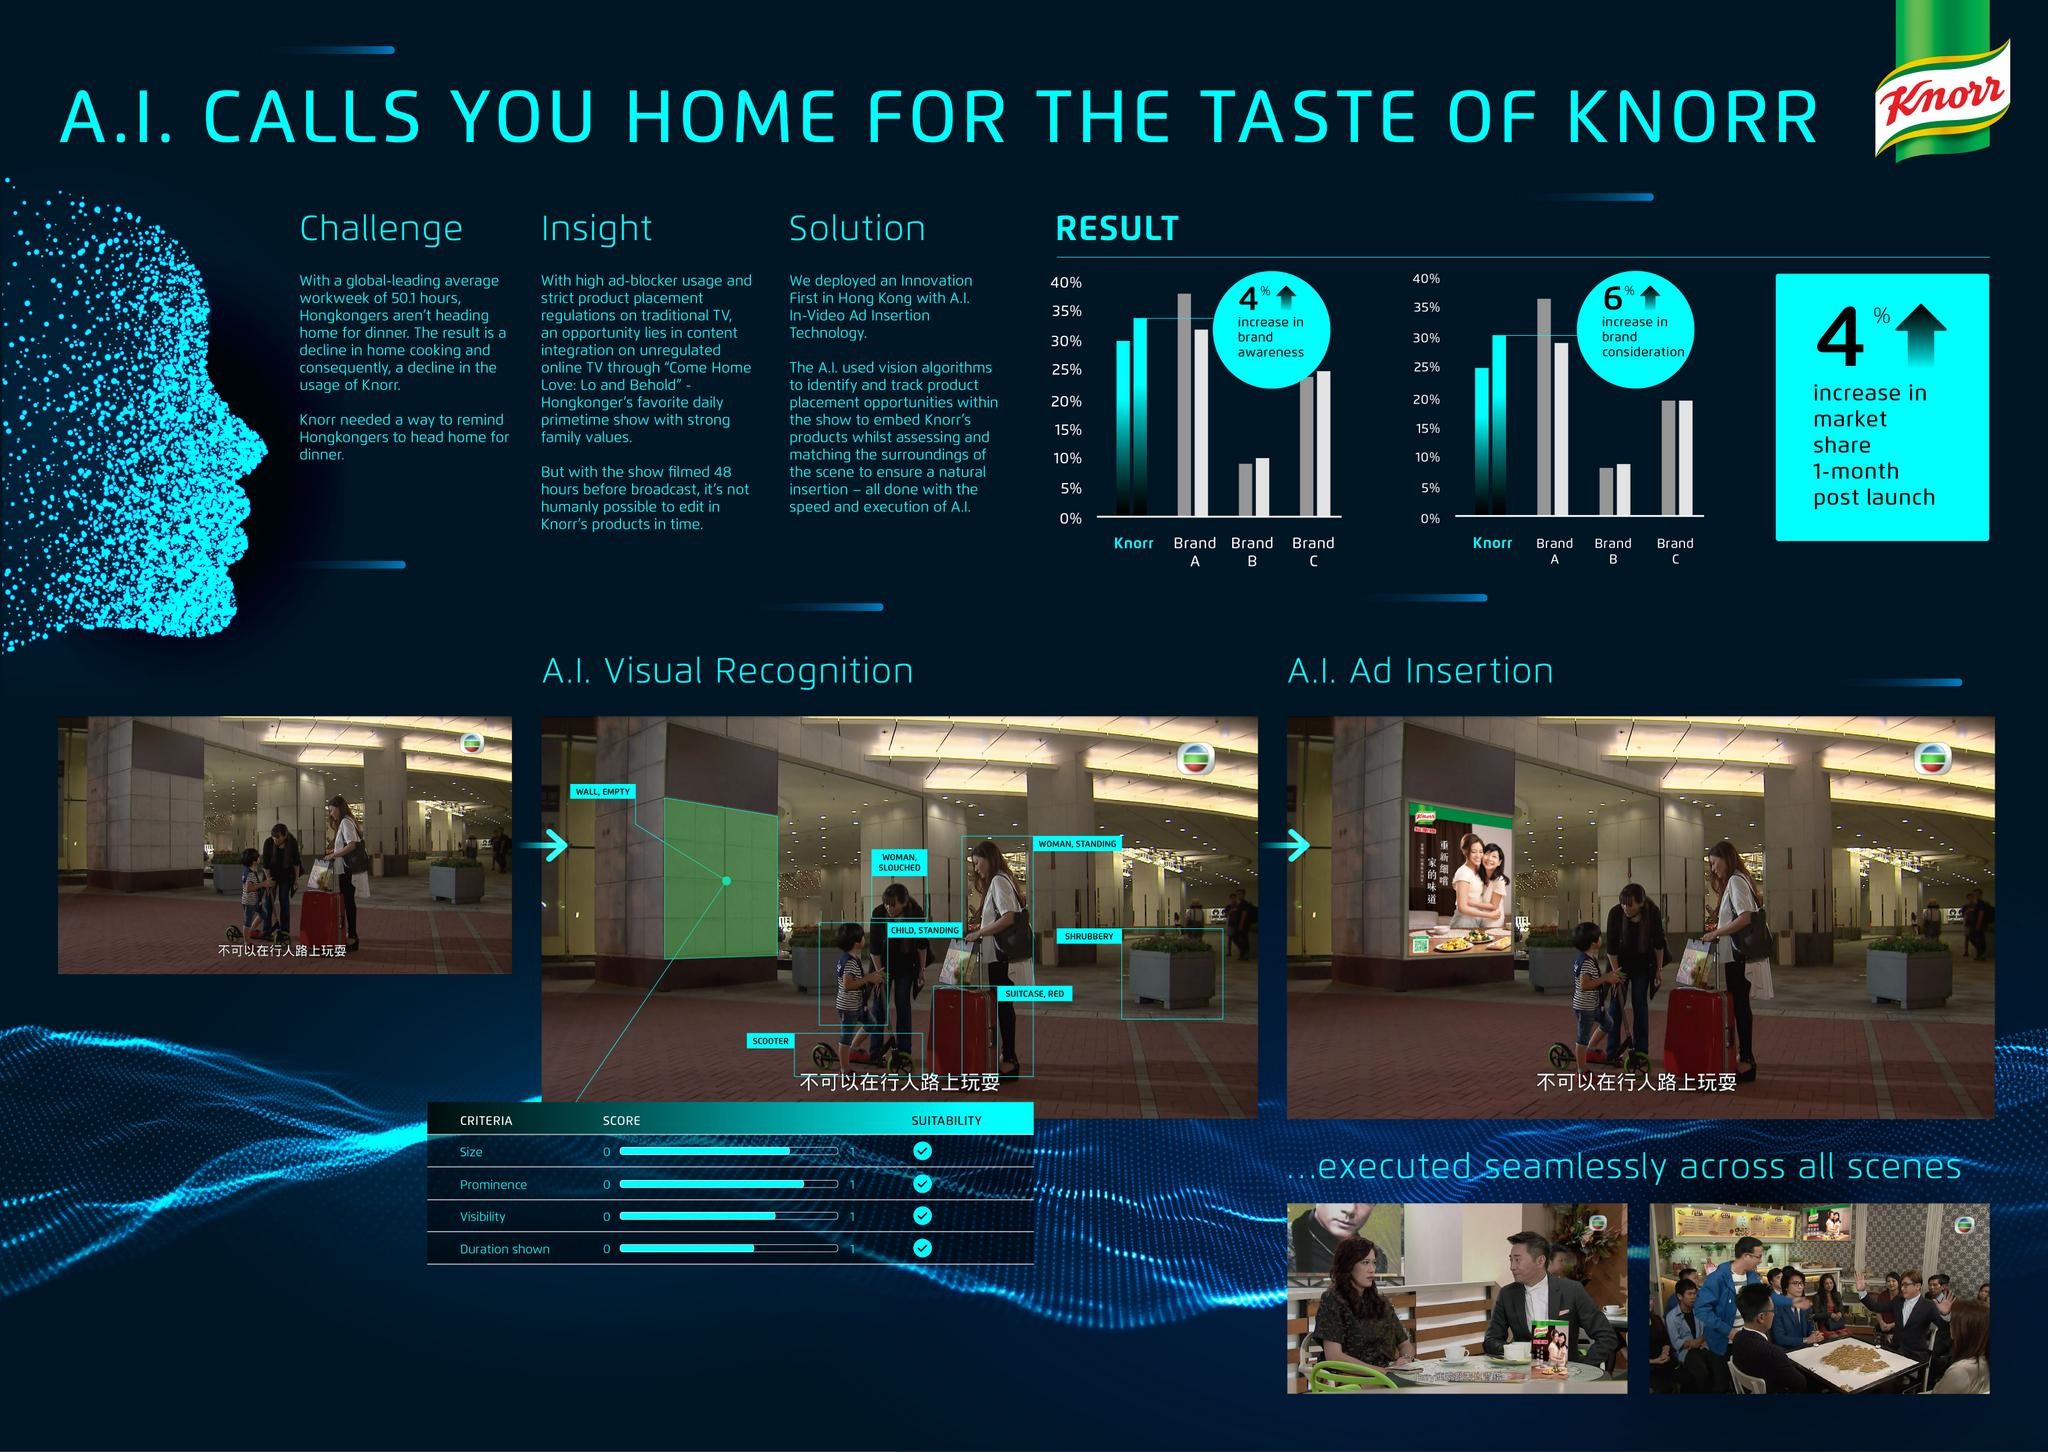 A.I. Calls You Home for the Taste of Knorr